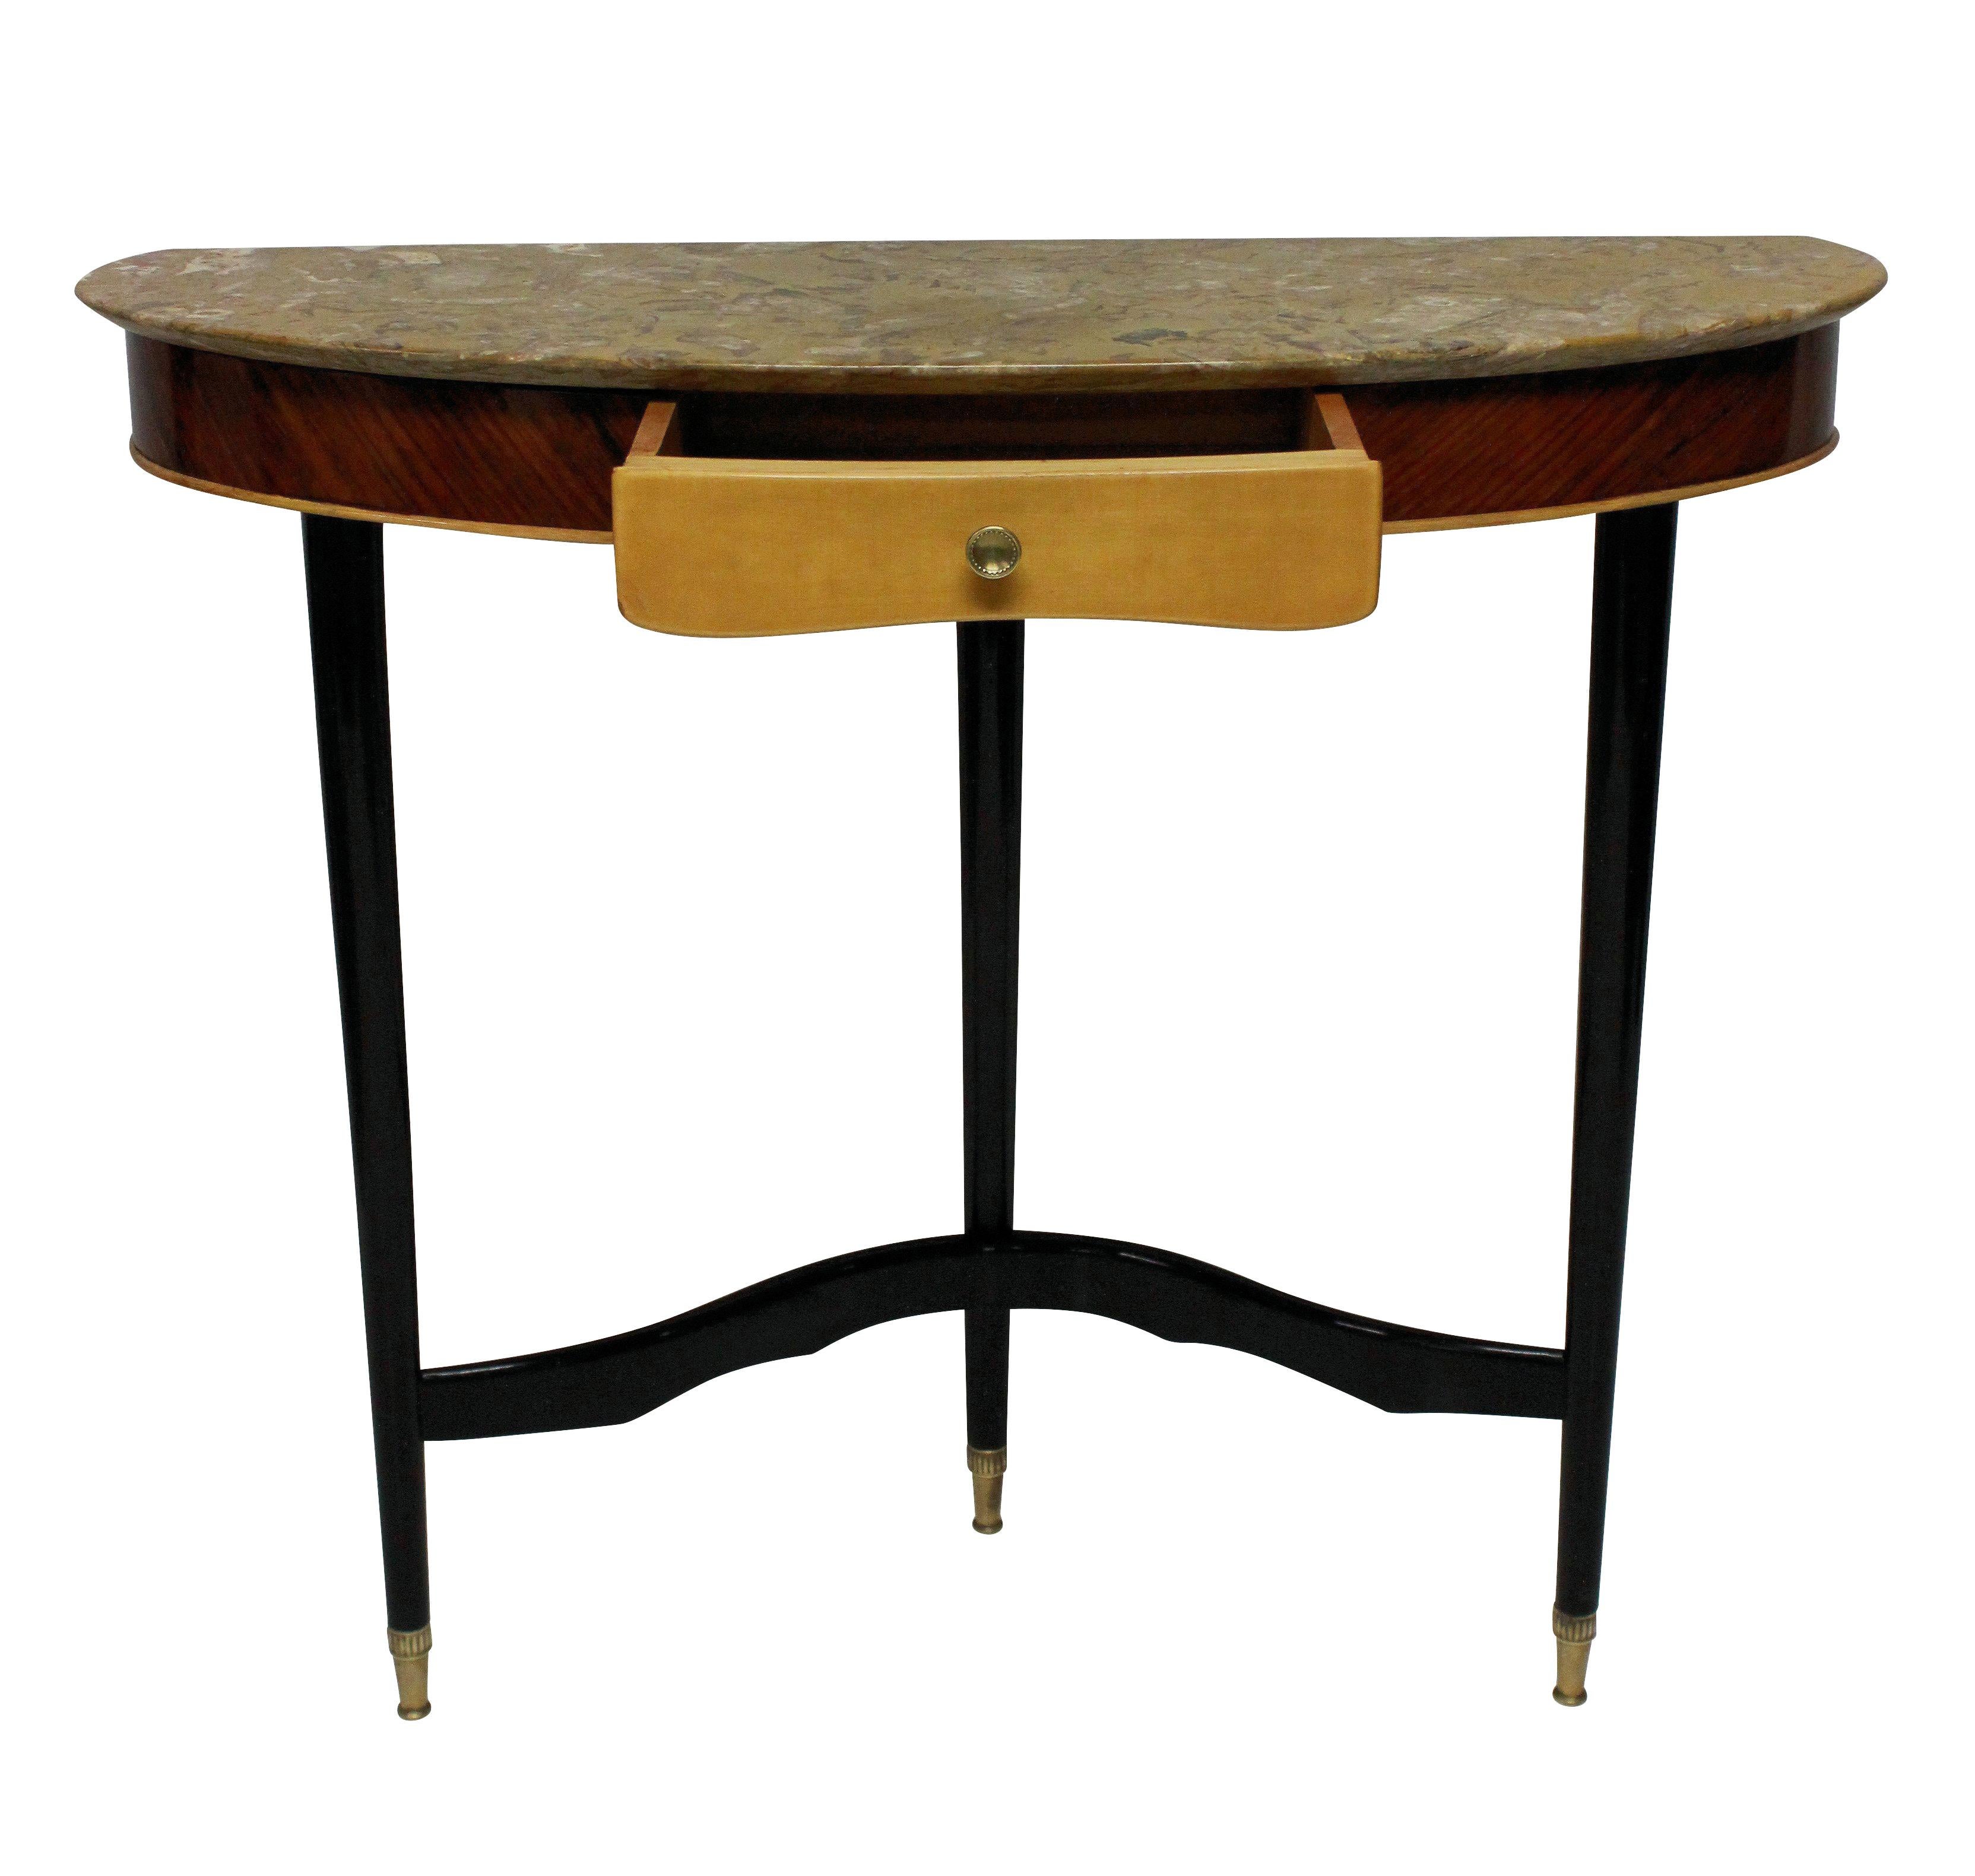 An Italian console table of stylish design, with two tone wood, ebonized legs, brass fittings and a fossil marble top.

 